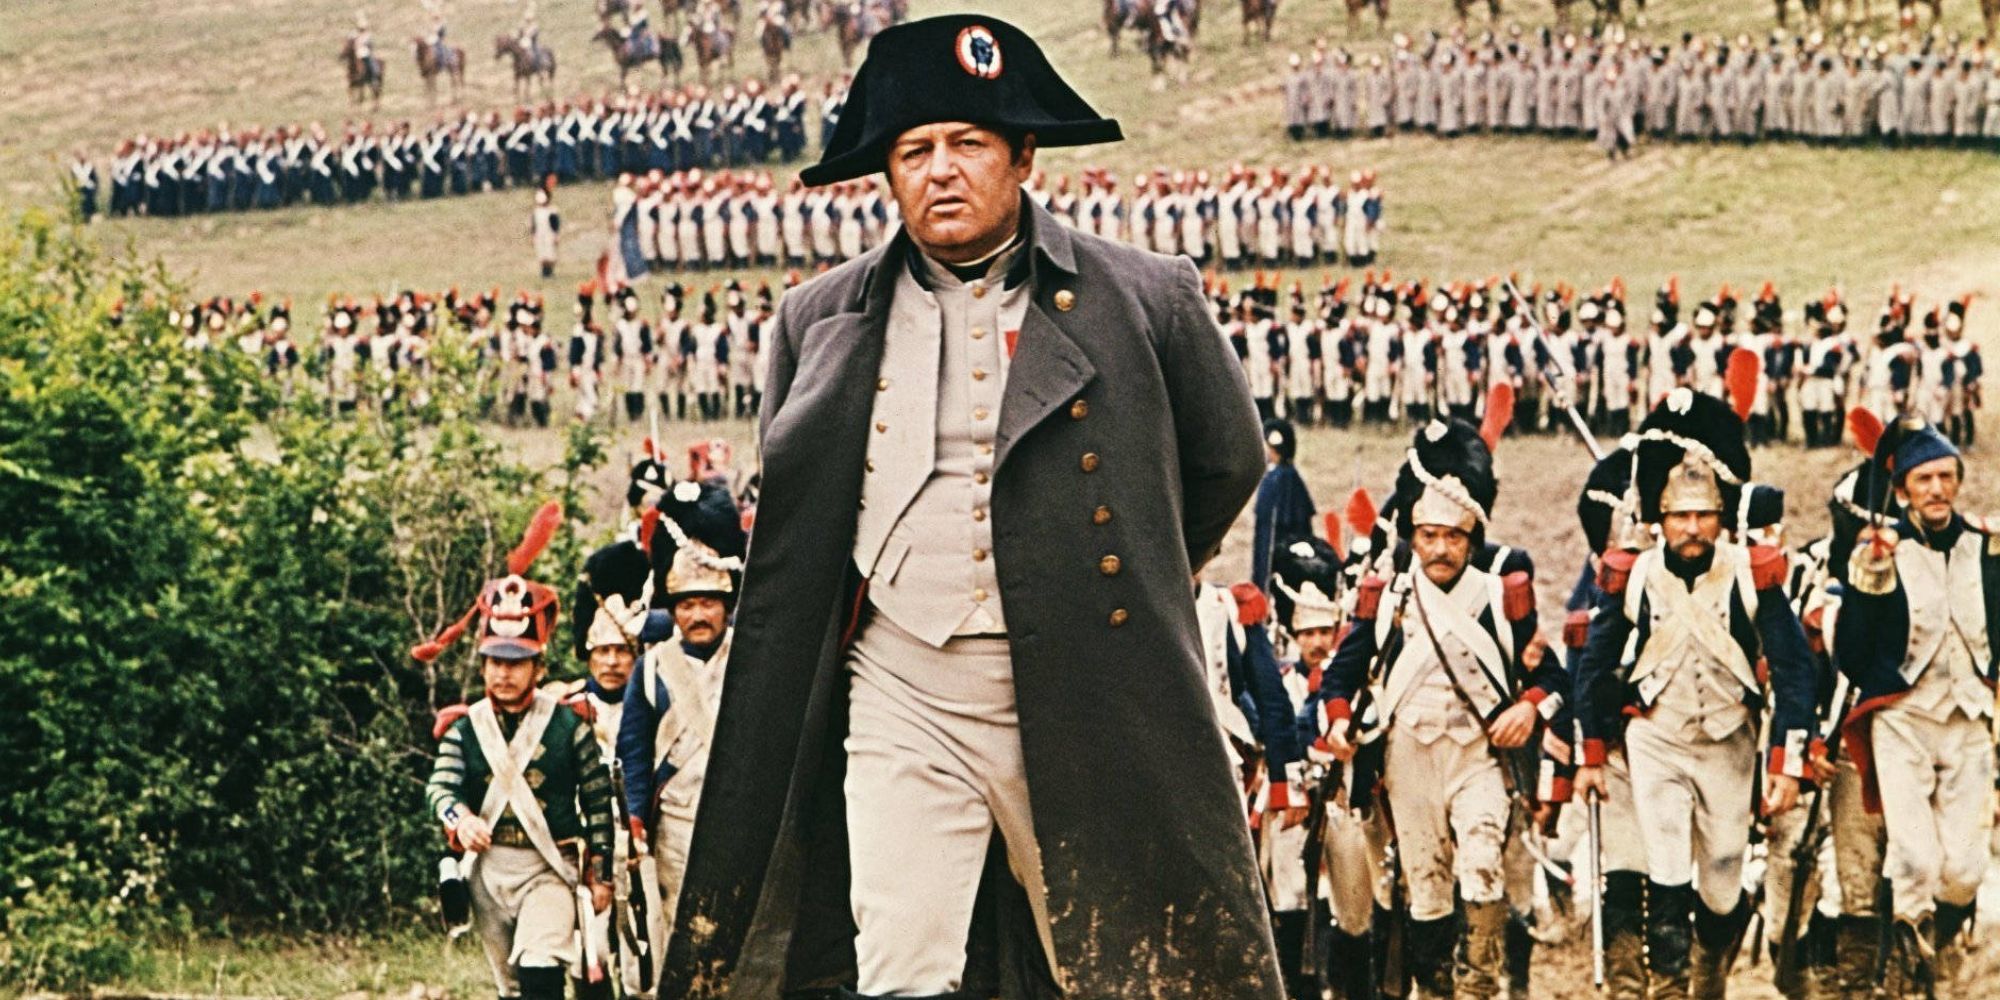 Rod Steiger in front of his troops in the 1970 Napoleon film Waterloo